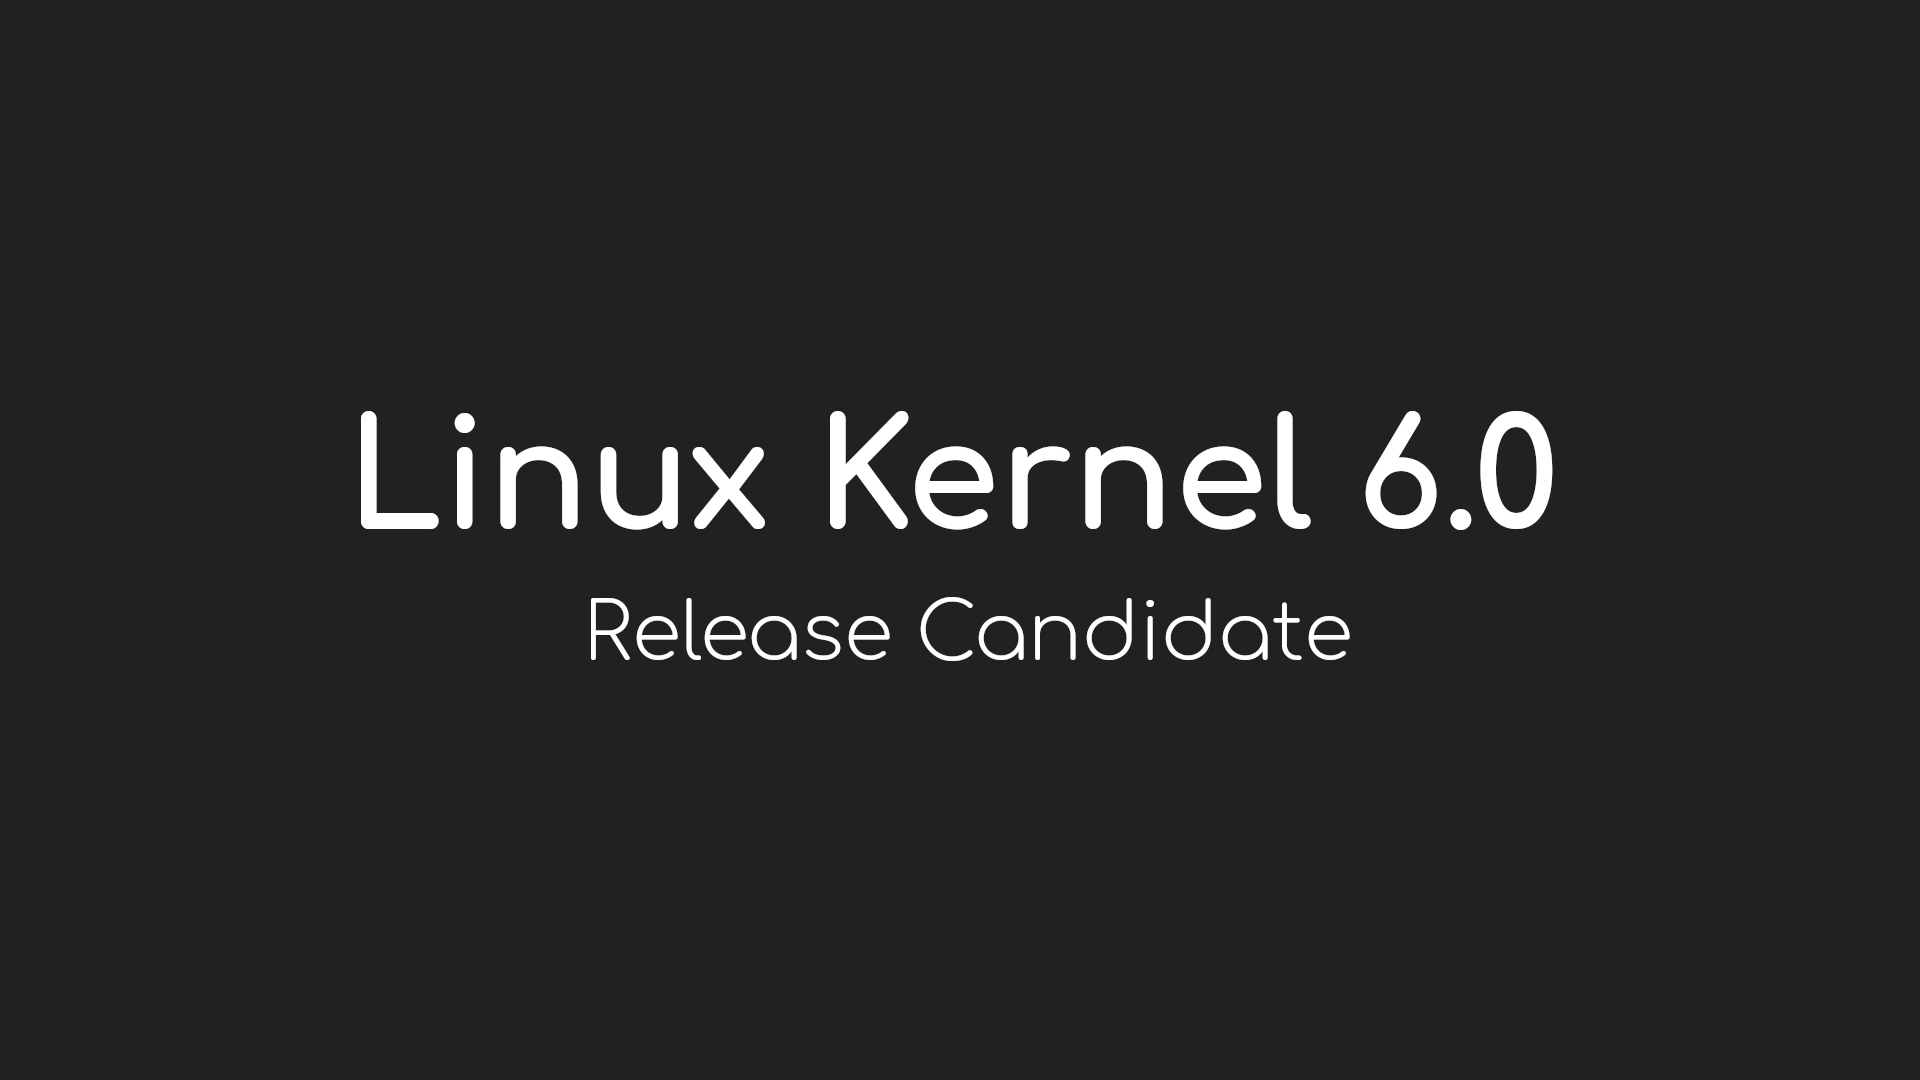 Linus Torvalds Announces First Linux Kernel 6.0 Release Candidate - 9to5Linux